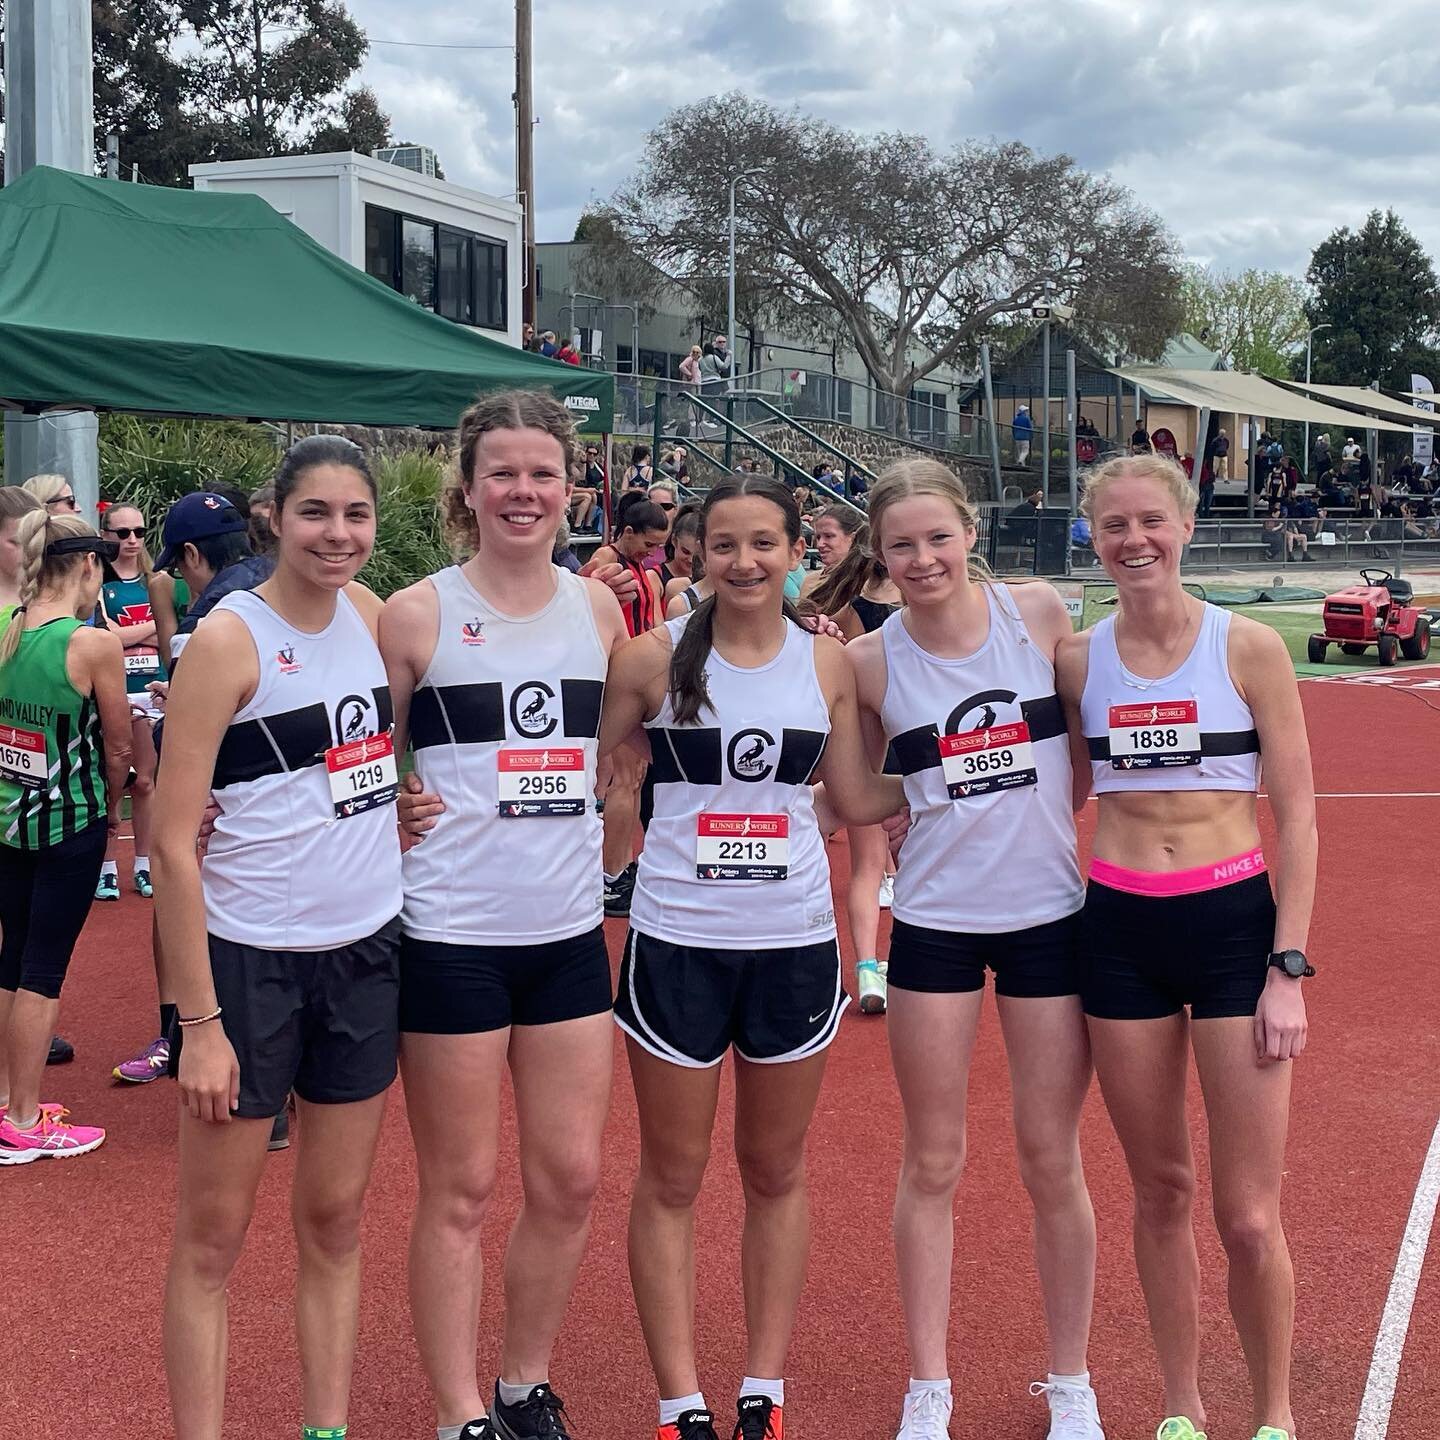 First track meet for the Vigor runners 22/23 season. Heaps of PB&rsquo;s and club records, it&rsquo;s gunna be a good season😁🤗💚 #athsvic #mansfieldathletics #collingwoodharriers #trackandfield #trackrunning #vigorcoaching